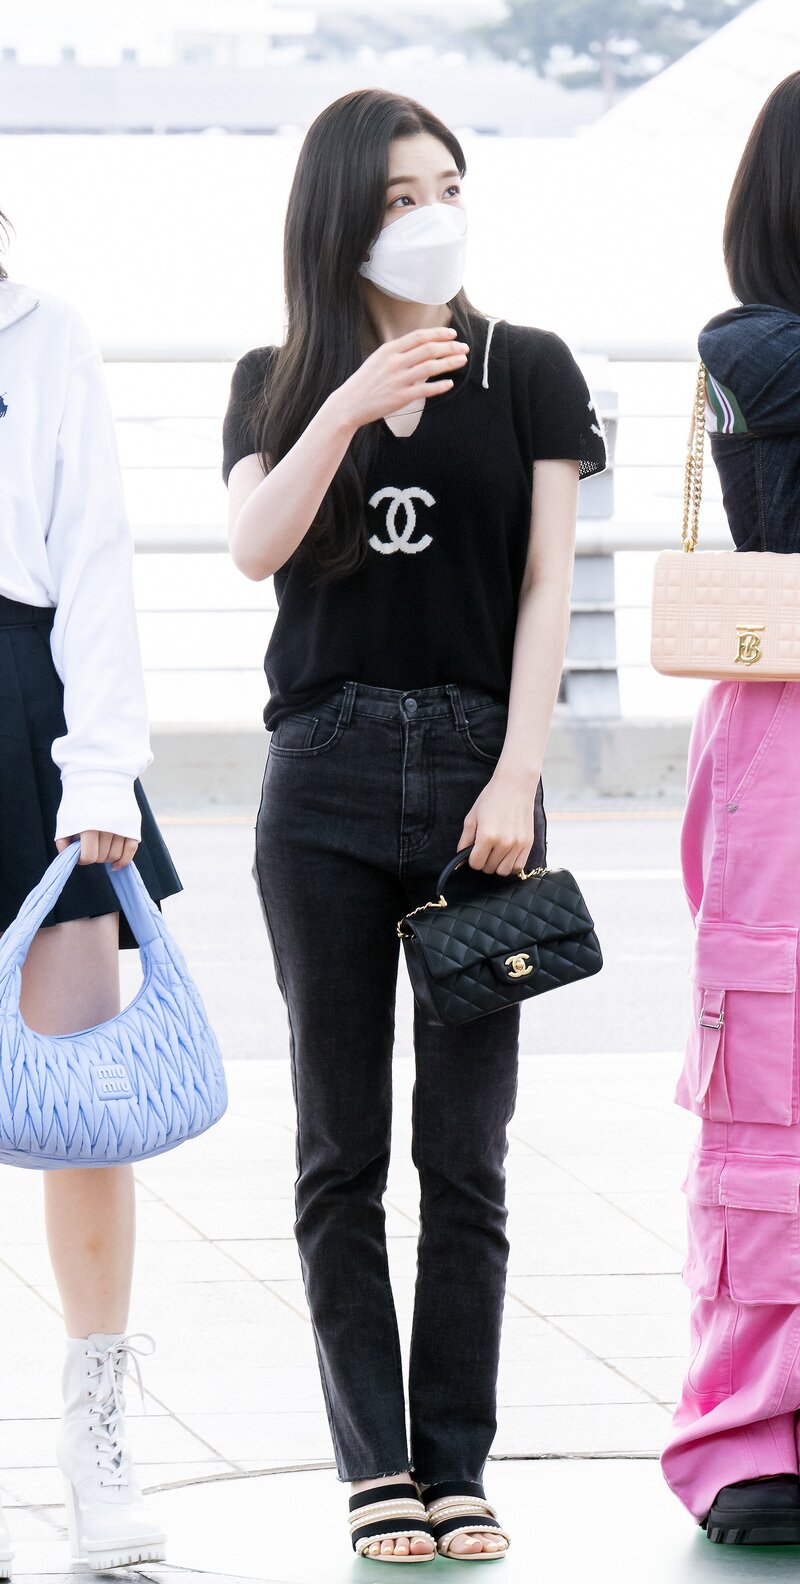 220520 Irene at Incheon International Airport headed for Allo Bank ...